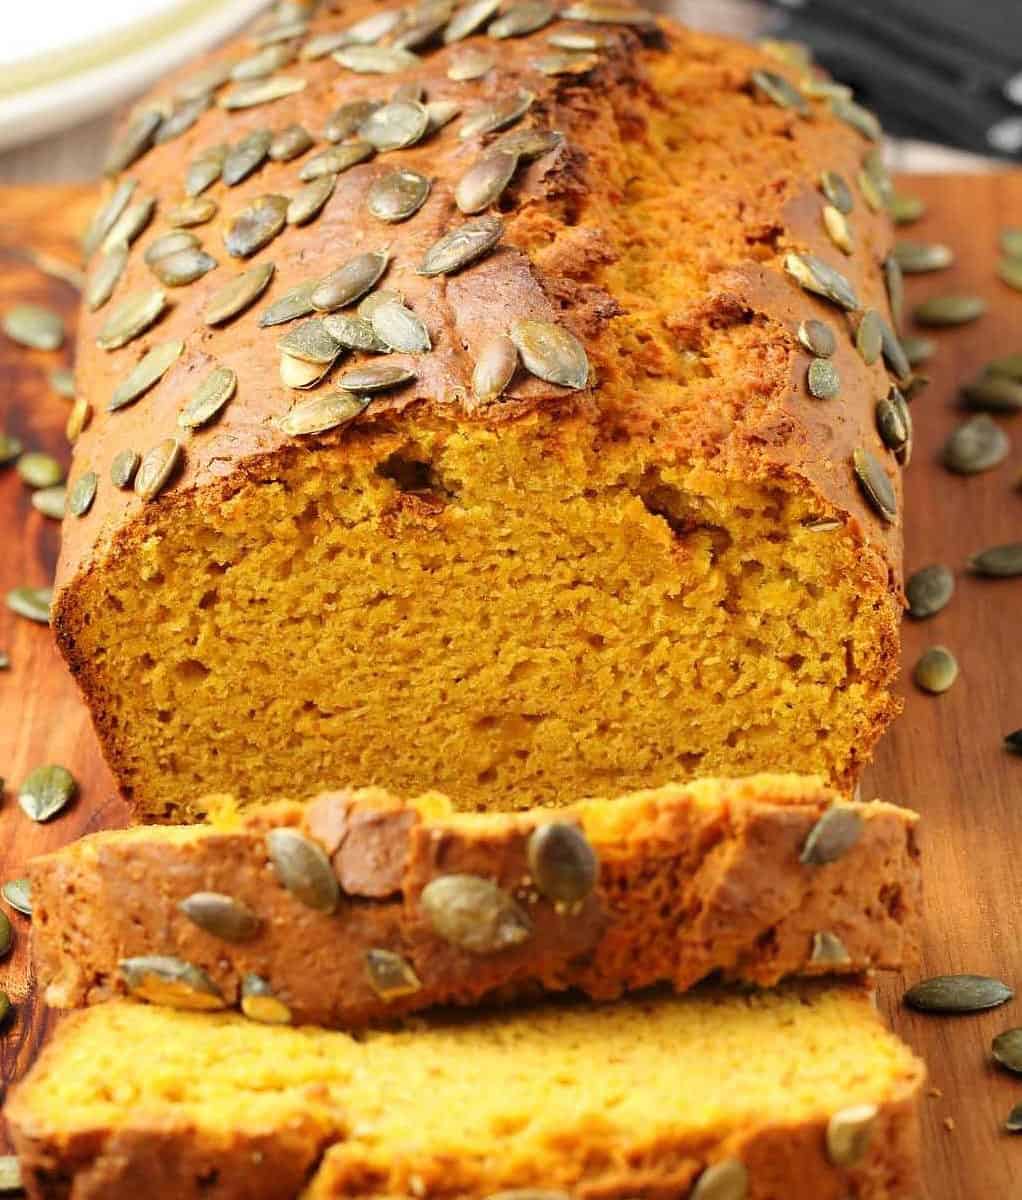  Are you ready for a pumpkin spice overload? Try this bread!